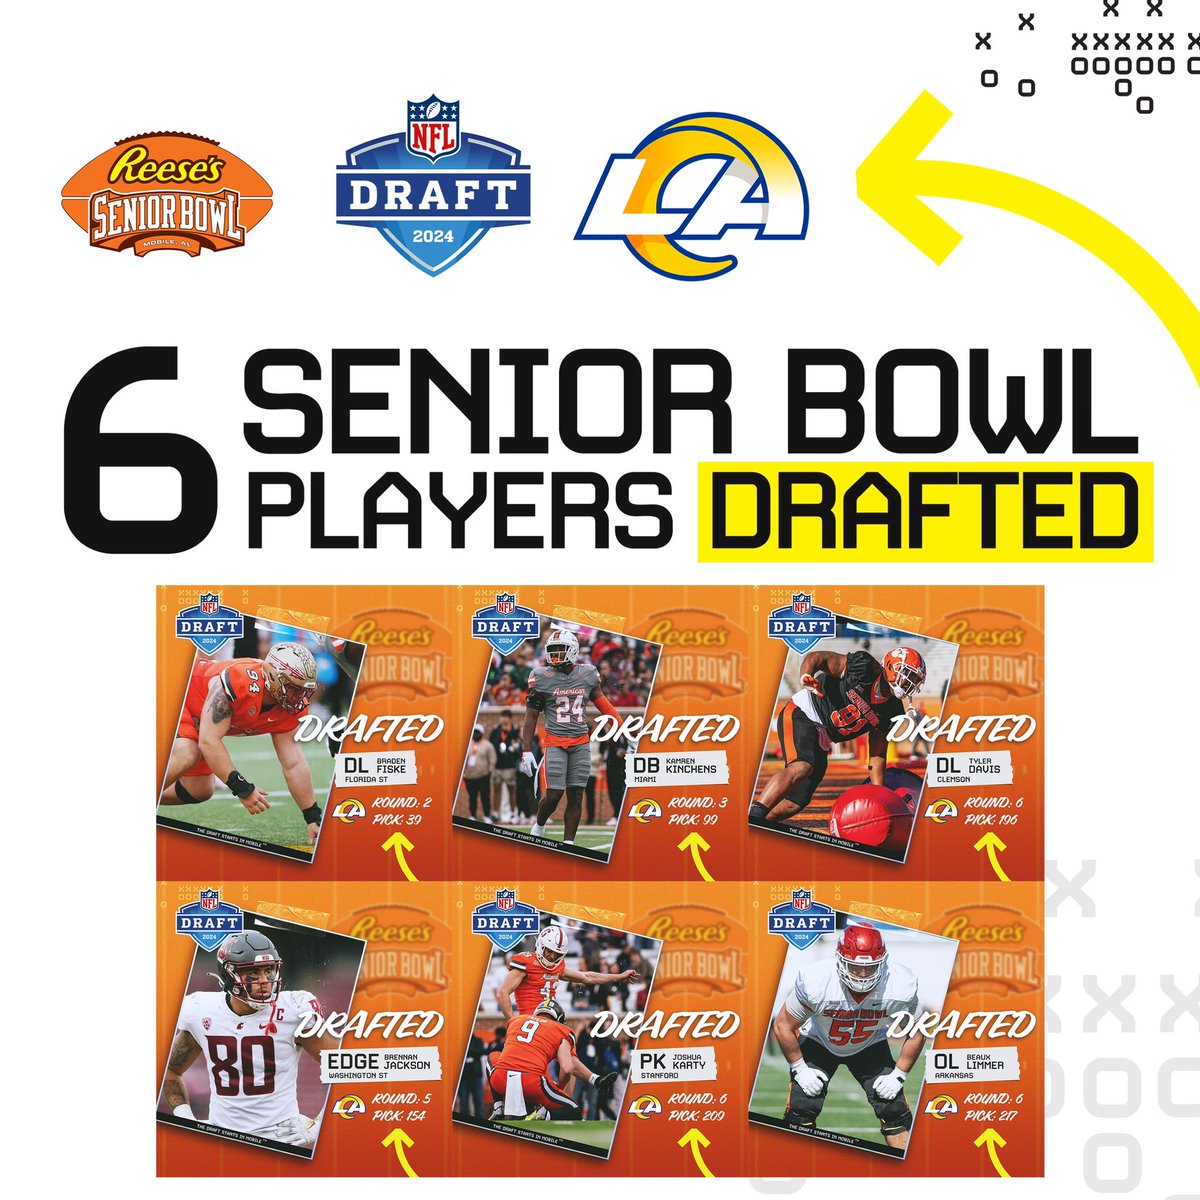 Here's what #RamsHouse fans can expect from @seniorbowl rookie class: 🐏 DT Braden Fiske (Round 2, Pick 39)- Top P5 riser in entire '24 class. Disruptive penetrator with best get-off quicks & snap anticipation in DL class. High-end athlete with enough position flex to start…